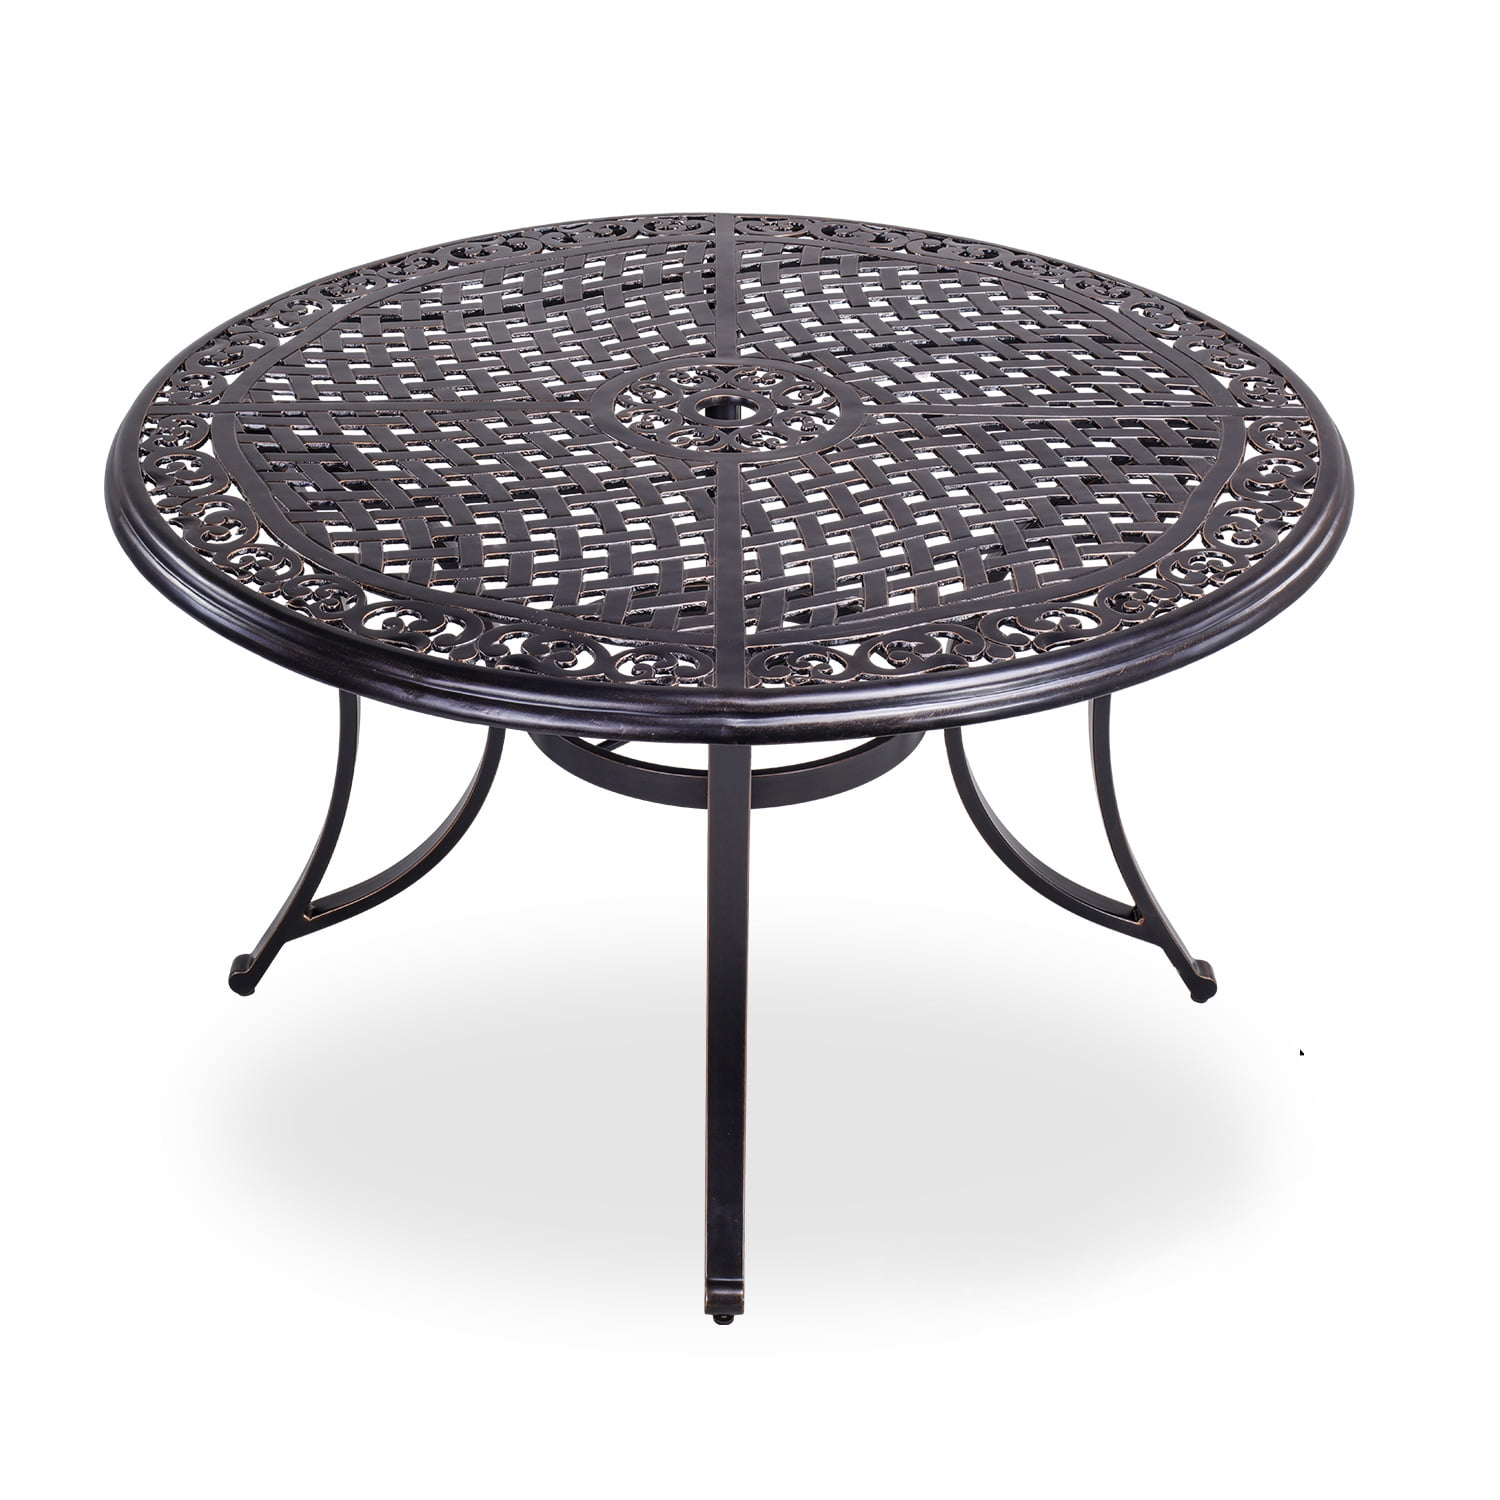 48&quot; Round Patio Dining Table with Umbrella Hole, Aluminum Casting Top Outdoor Furniture